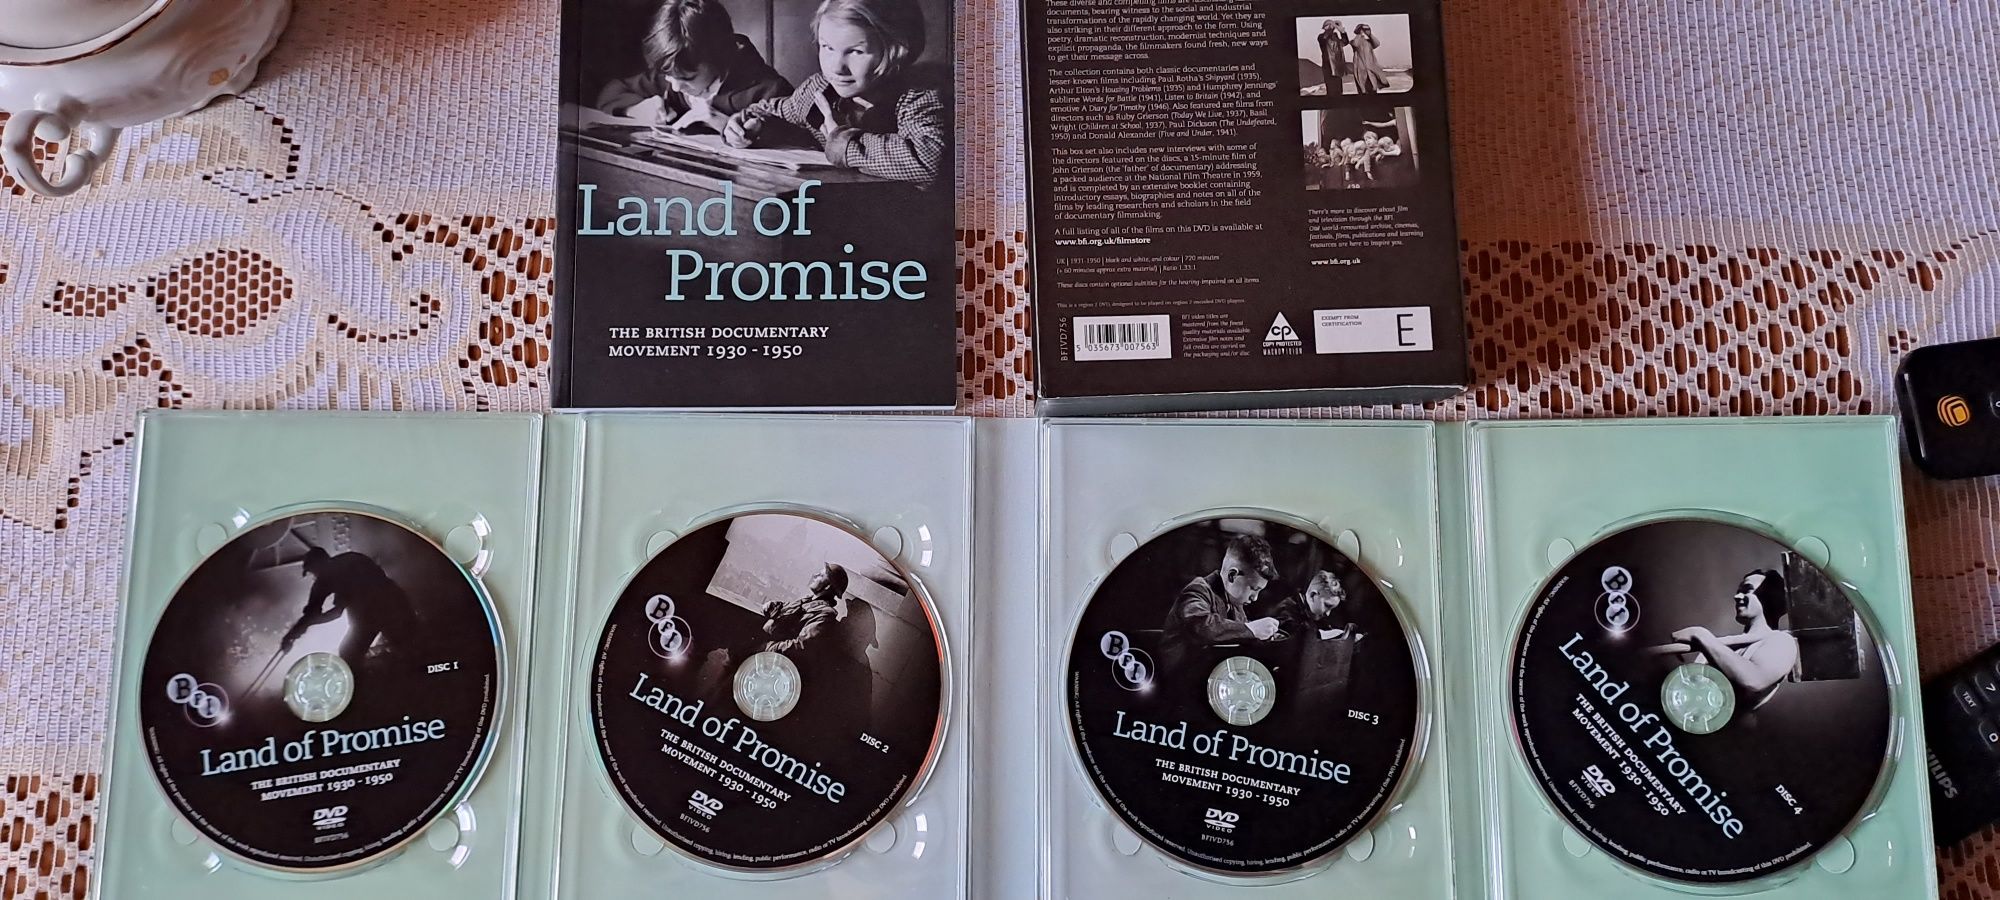 Land of Promise dvd